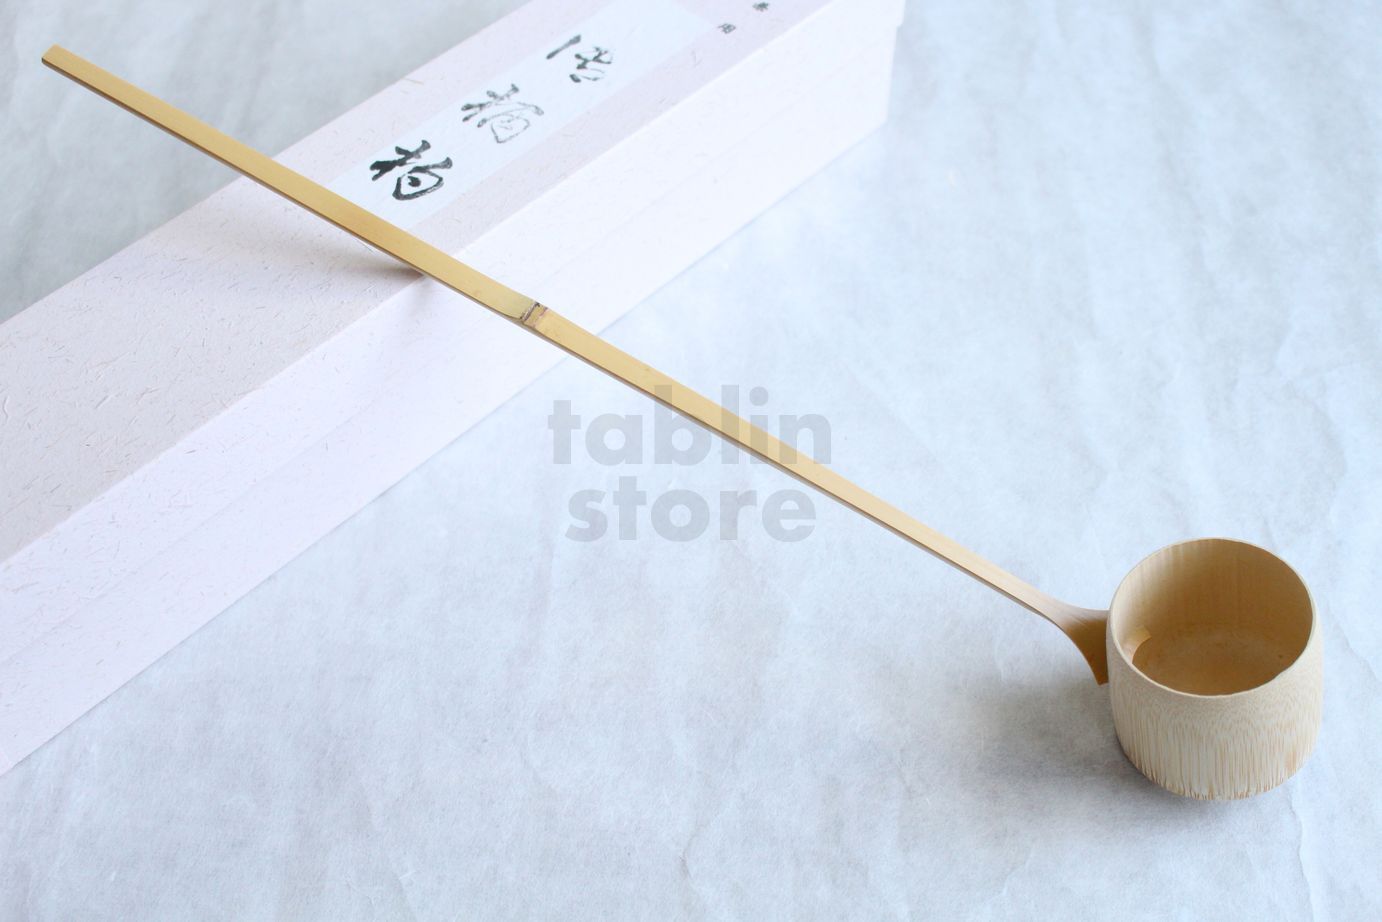 H HILABEE Set of 2 Bamboo Japanese Handled Standing Water Ladle 17 for Tea Ceremony 